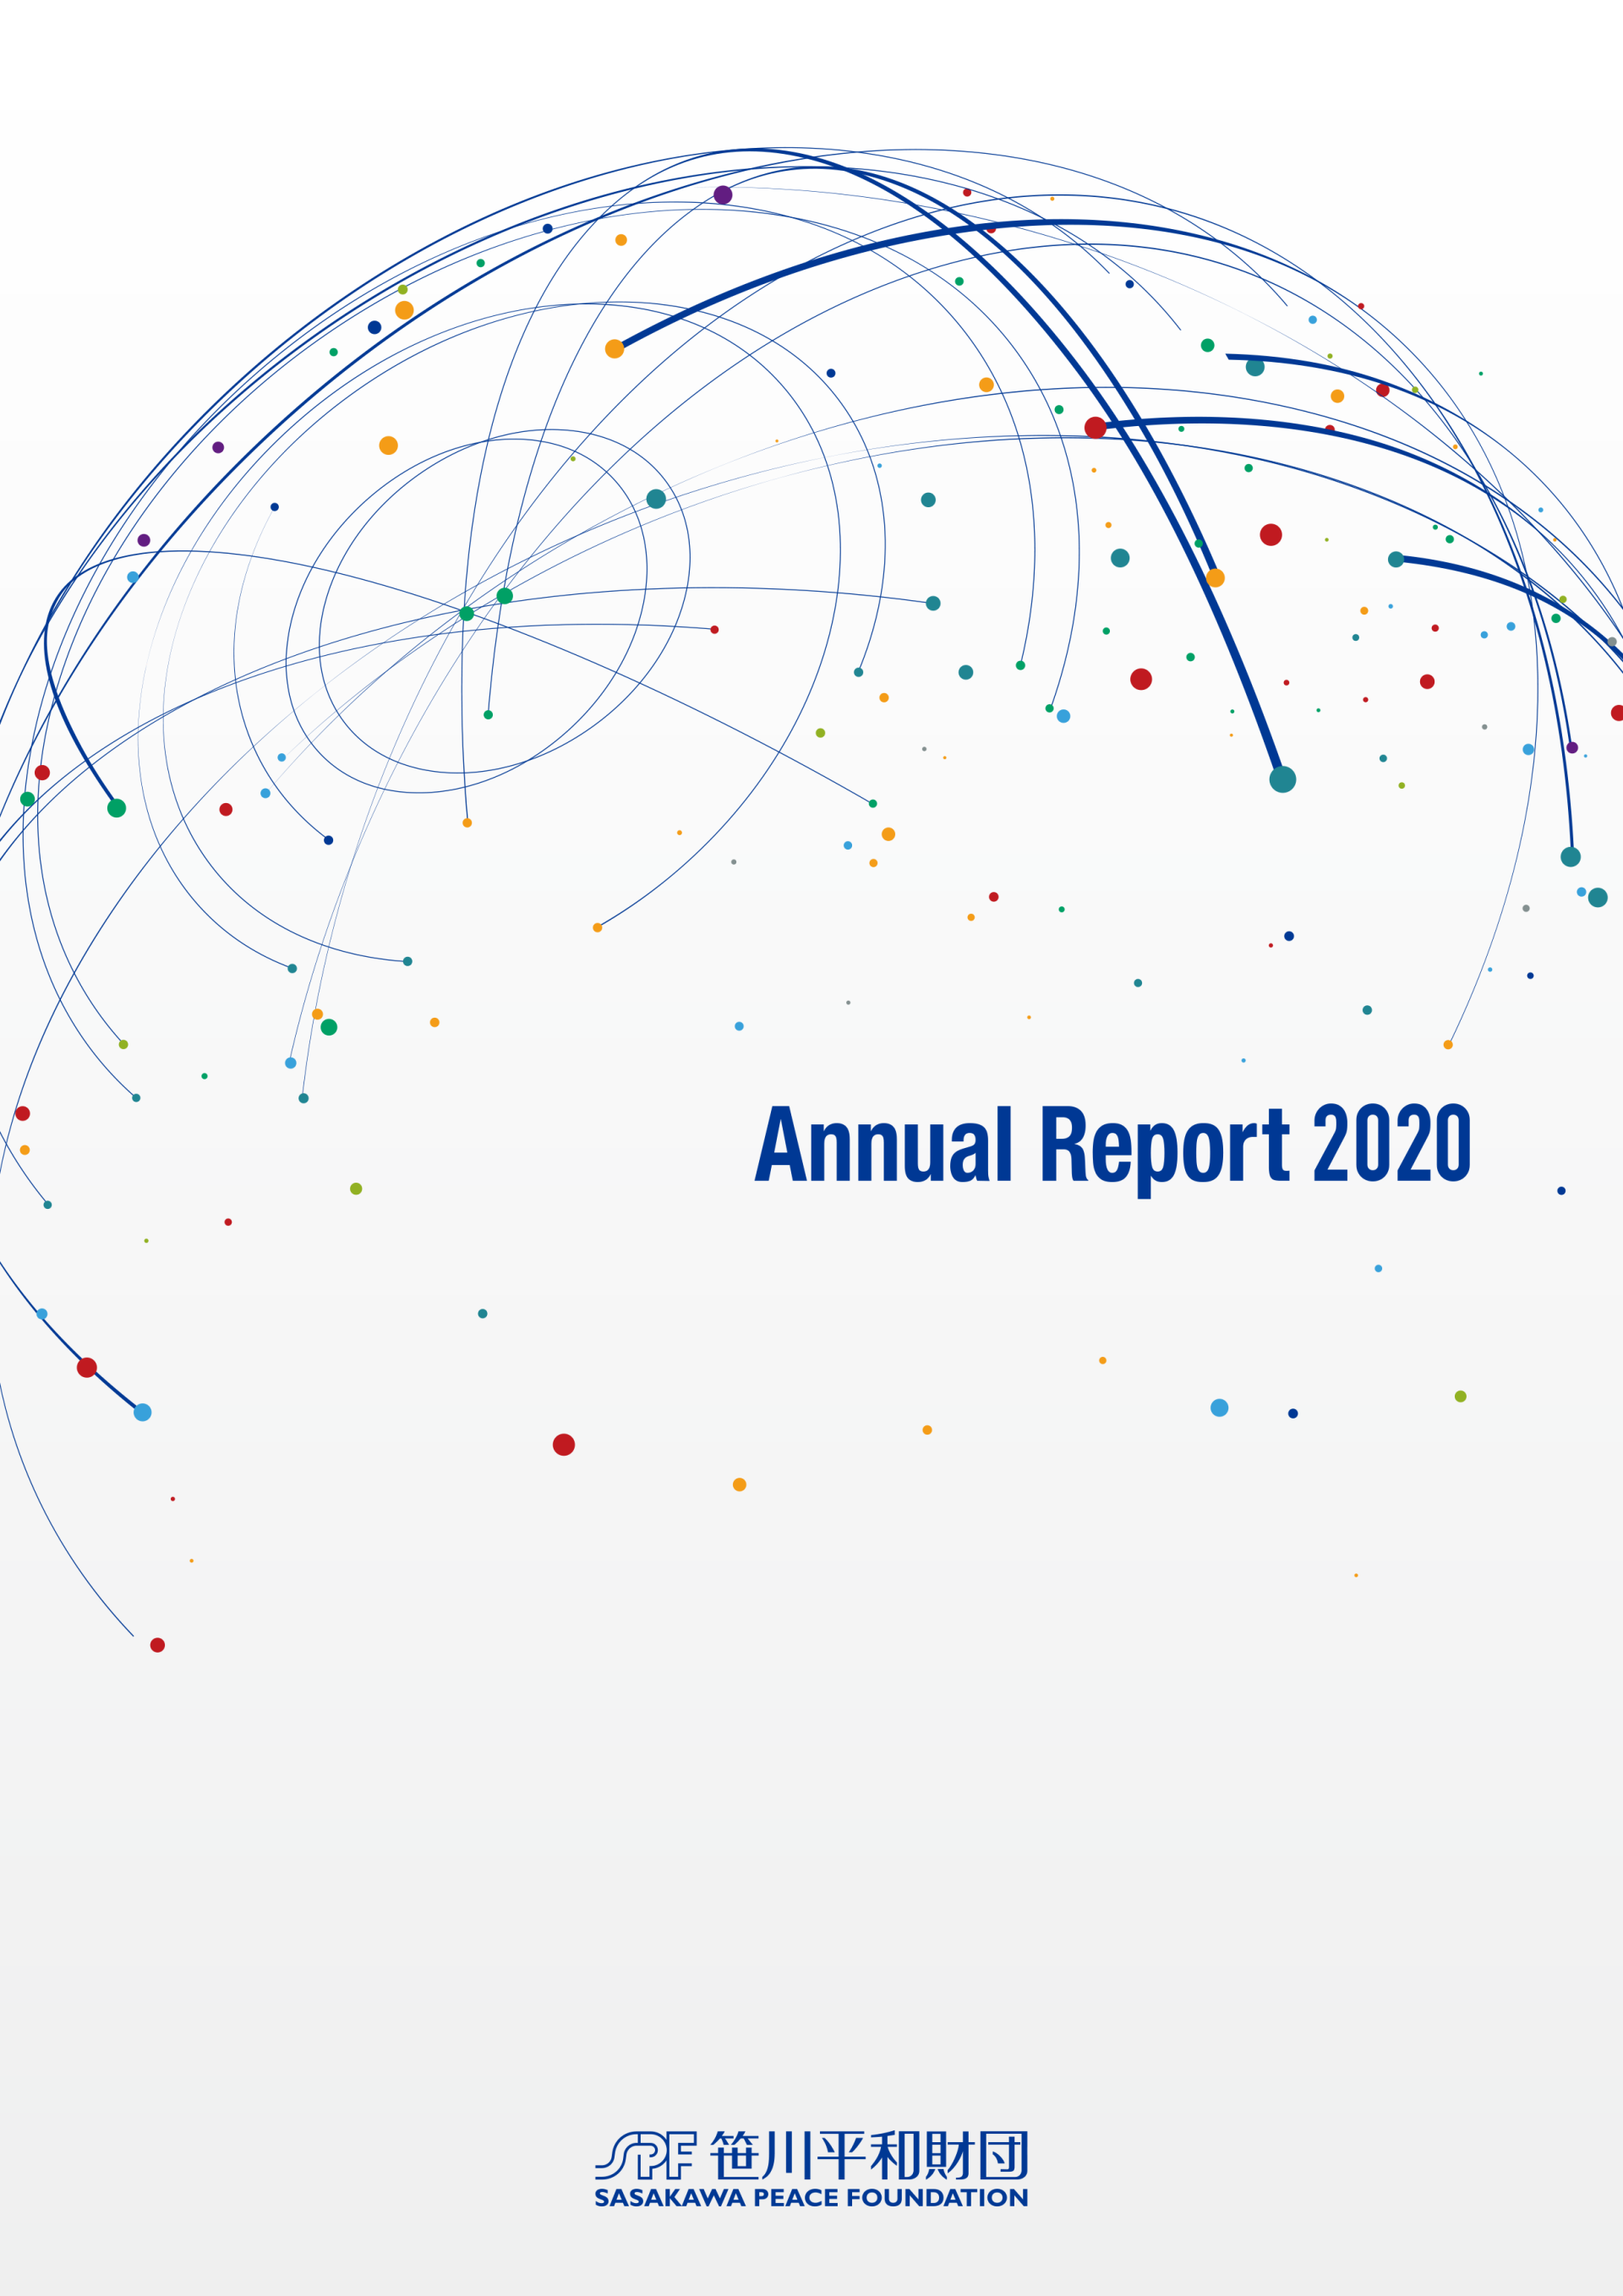 Annual Report (FY 2020)